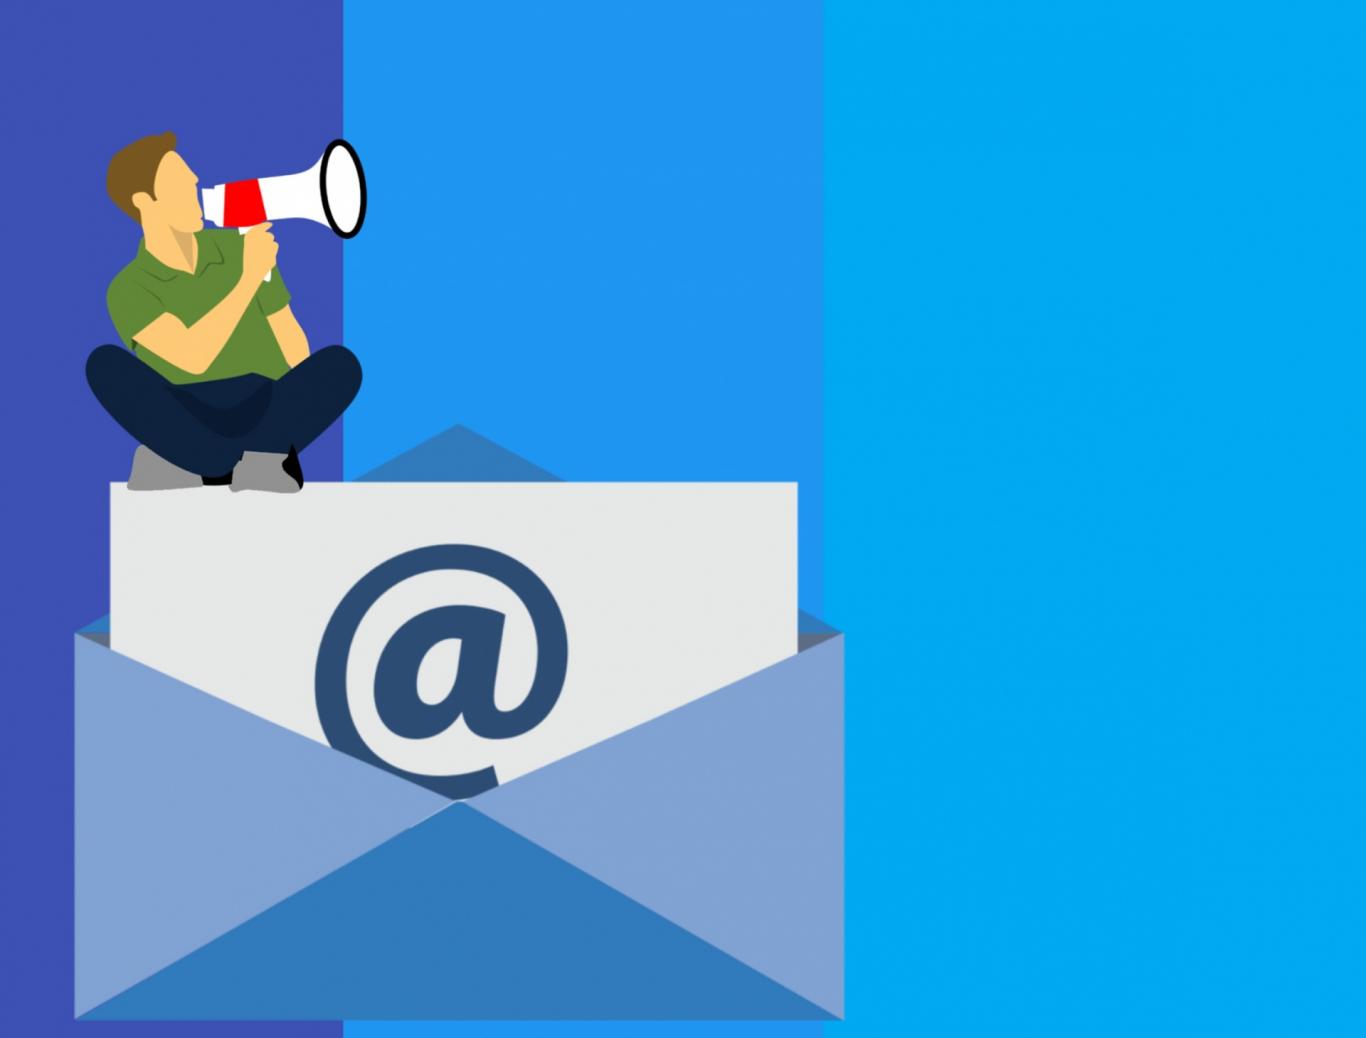 A vector style illustration of a man sitting on an email and shouting into a megaphone.